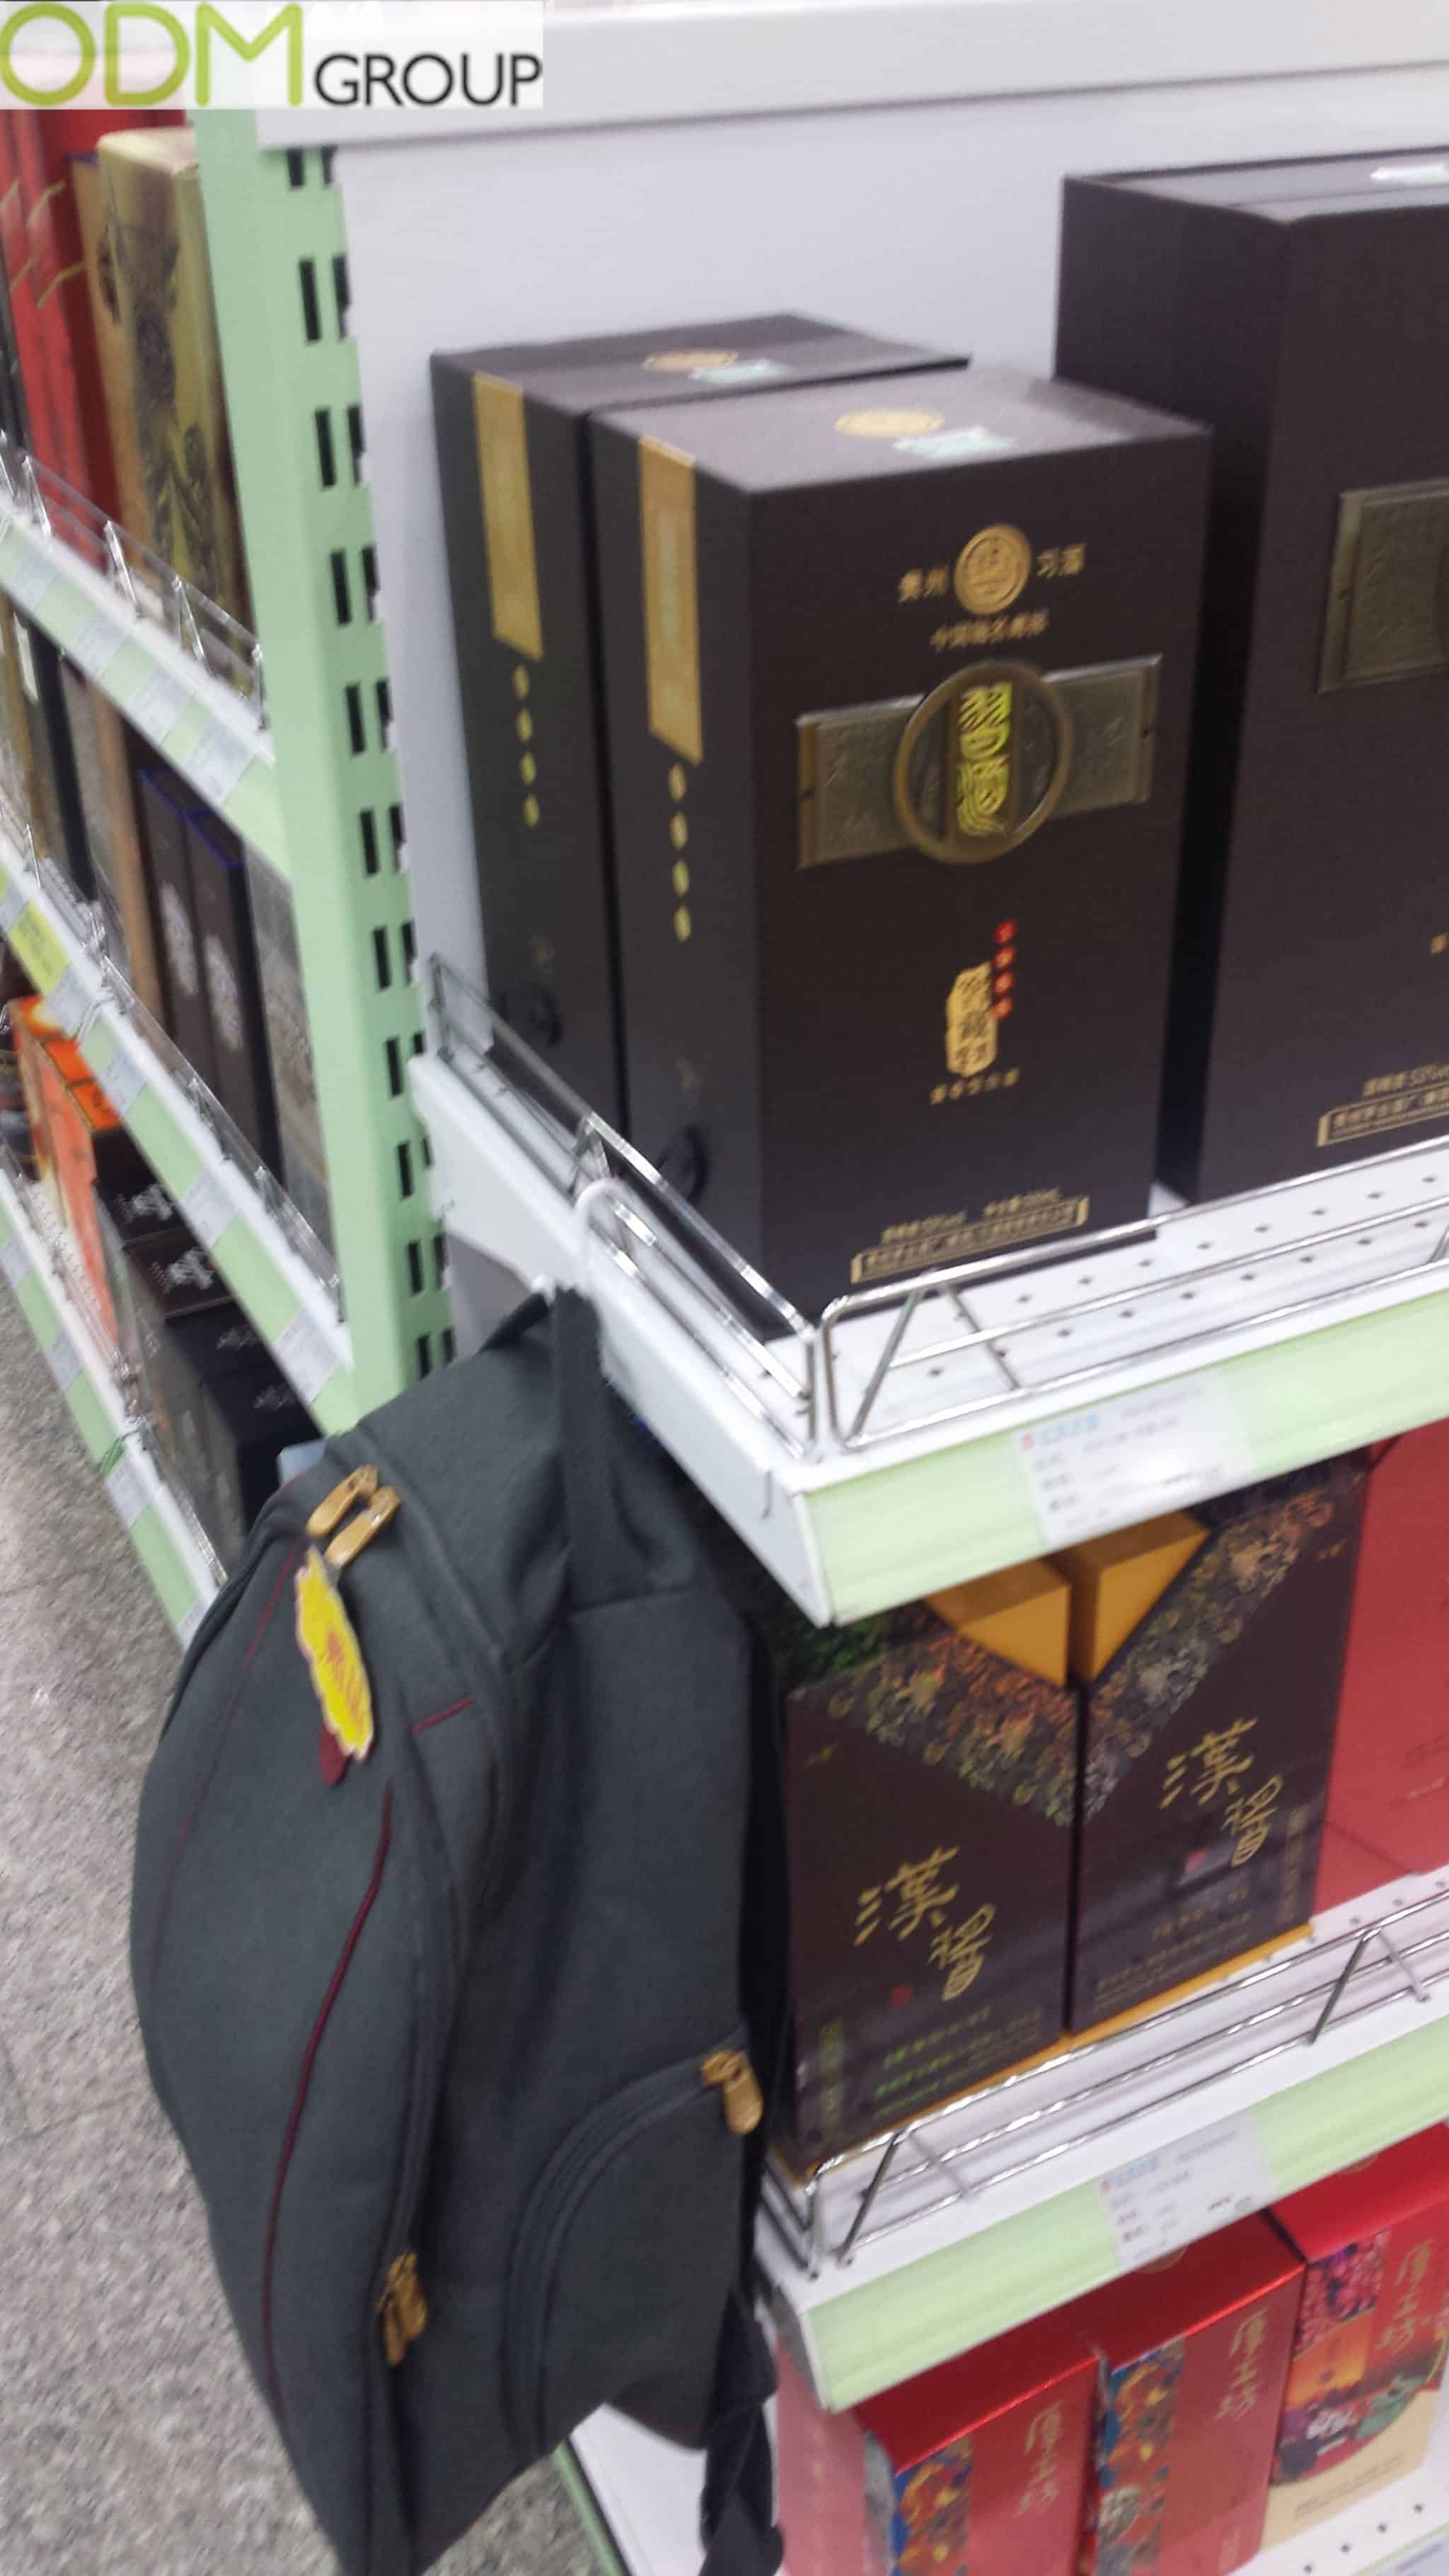 Promotional Bags by Guizhou Maotai Distillery (Group)